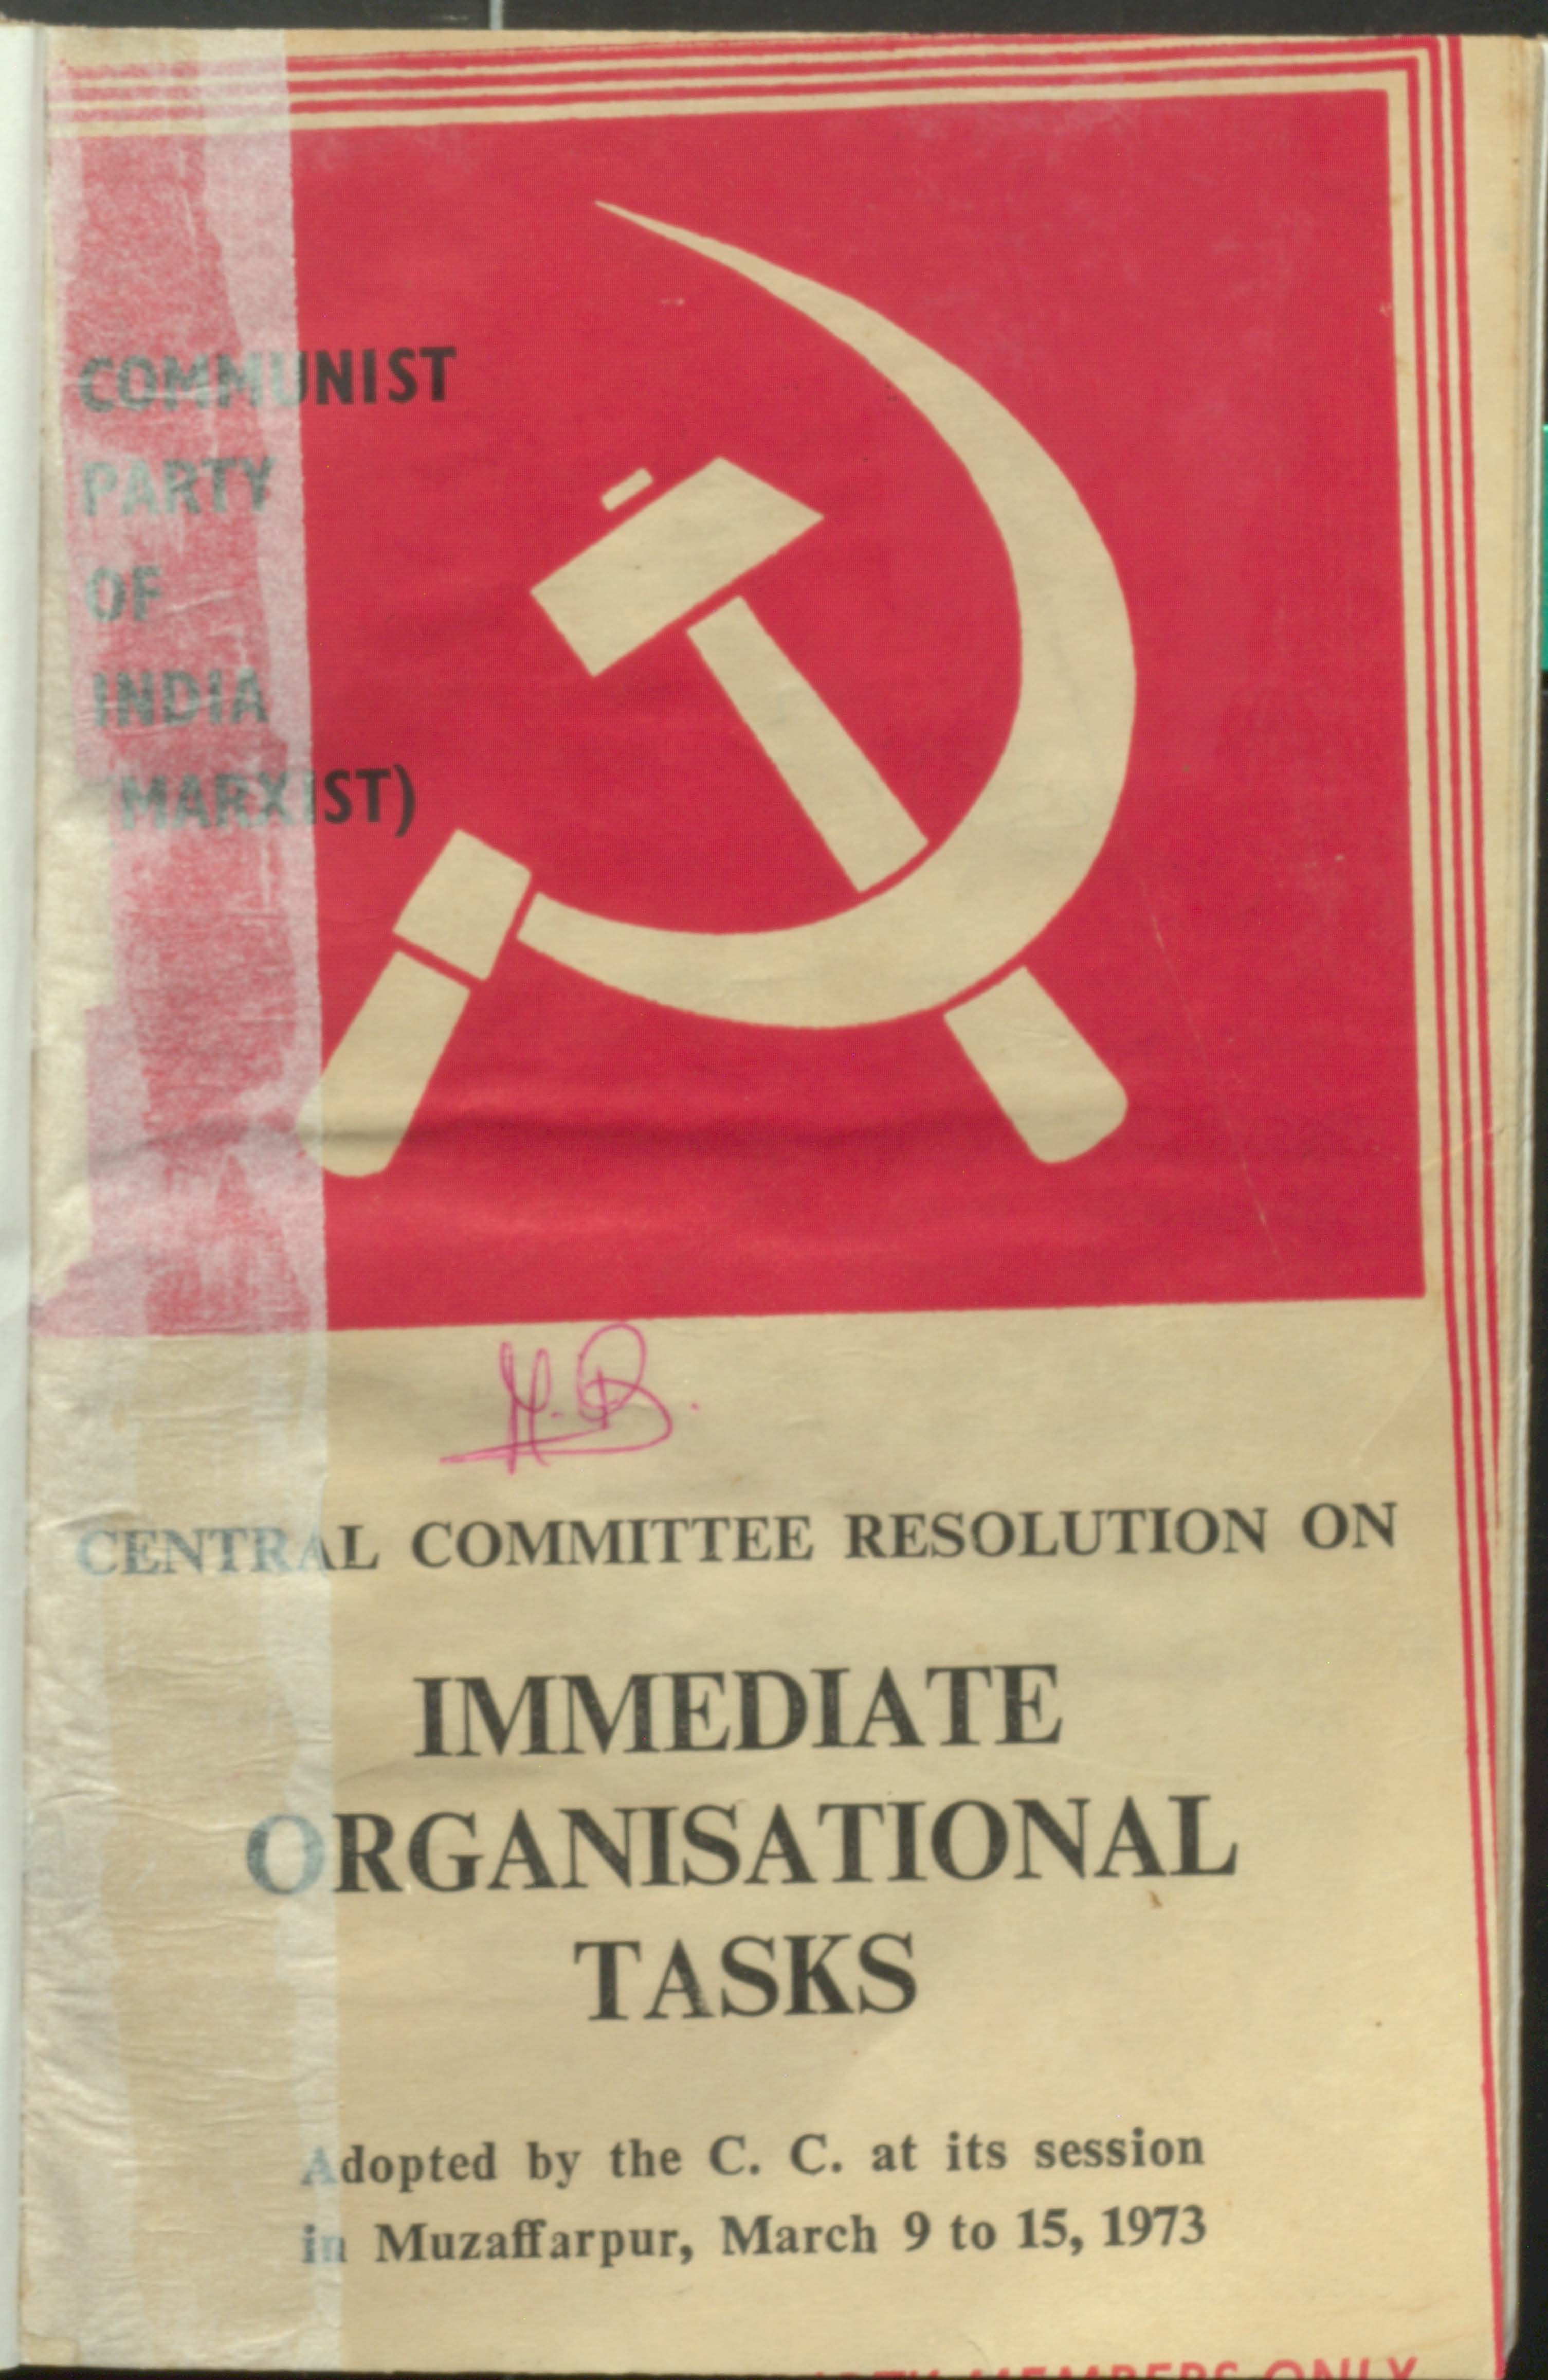 Central Committee Resolution on Immediate Organisational Tasks march 9 to 15, 1973